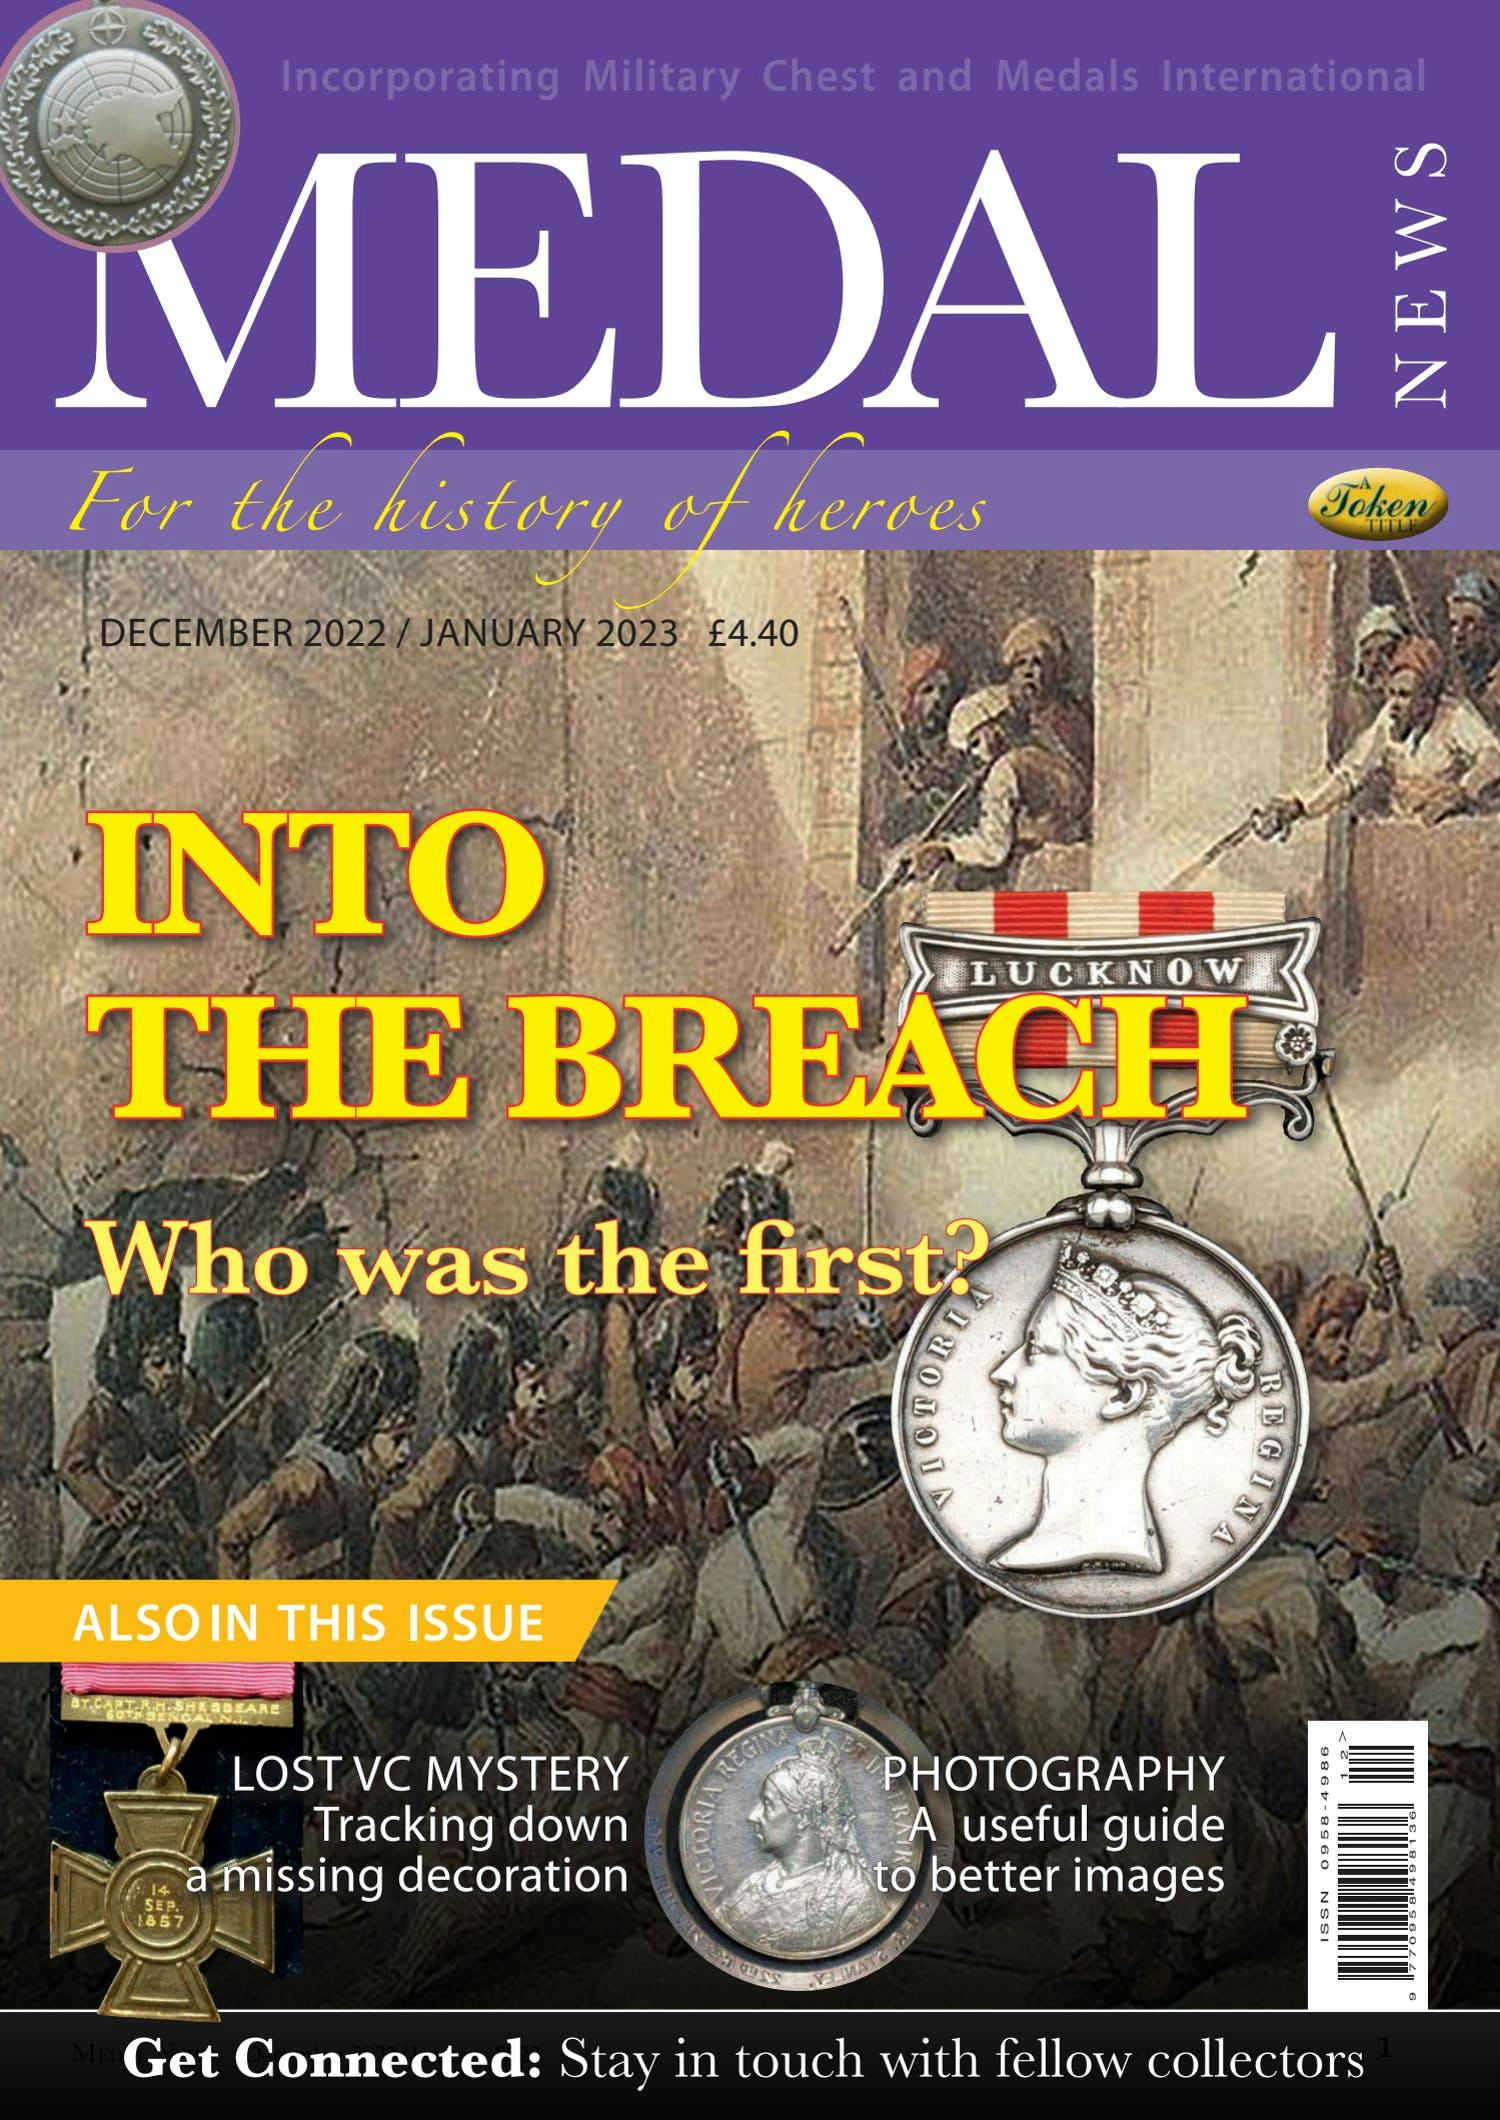 Front cover of 'Into the breach', Medal News January 2023, Volume 61, Number 1 by Token Publishing